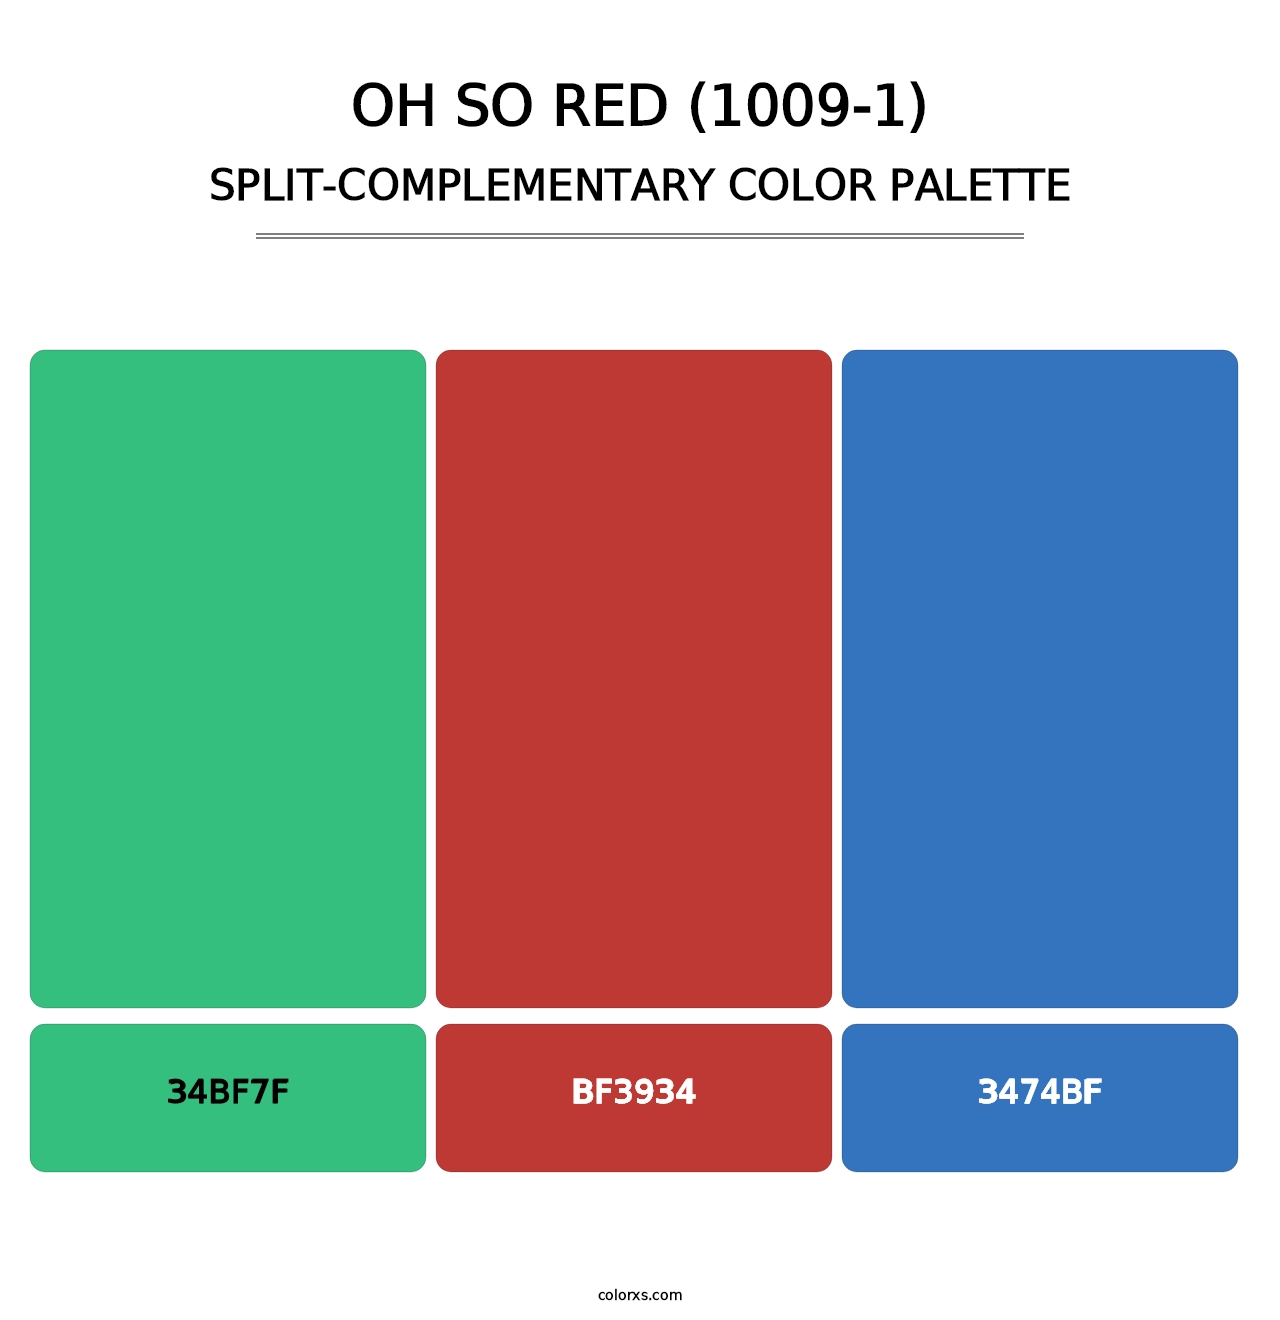 Oh So Red (1009-1) - Split-Complementary Color Palette